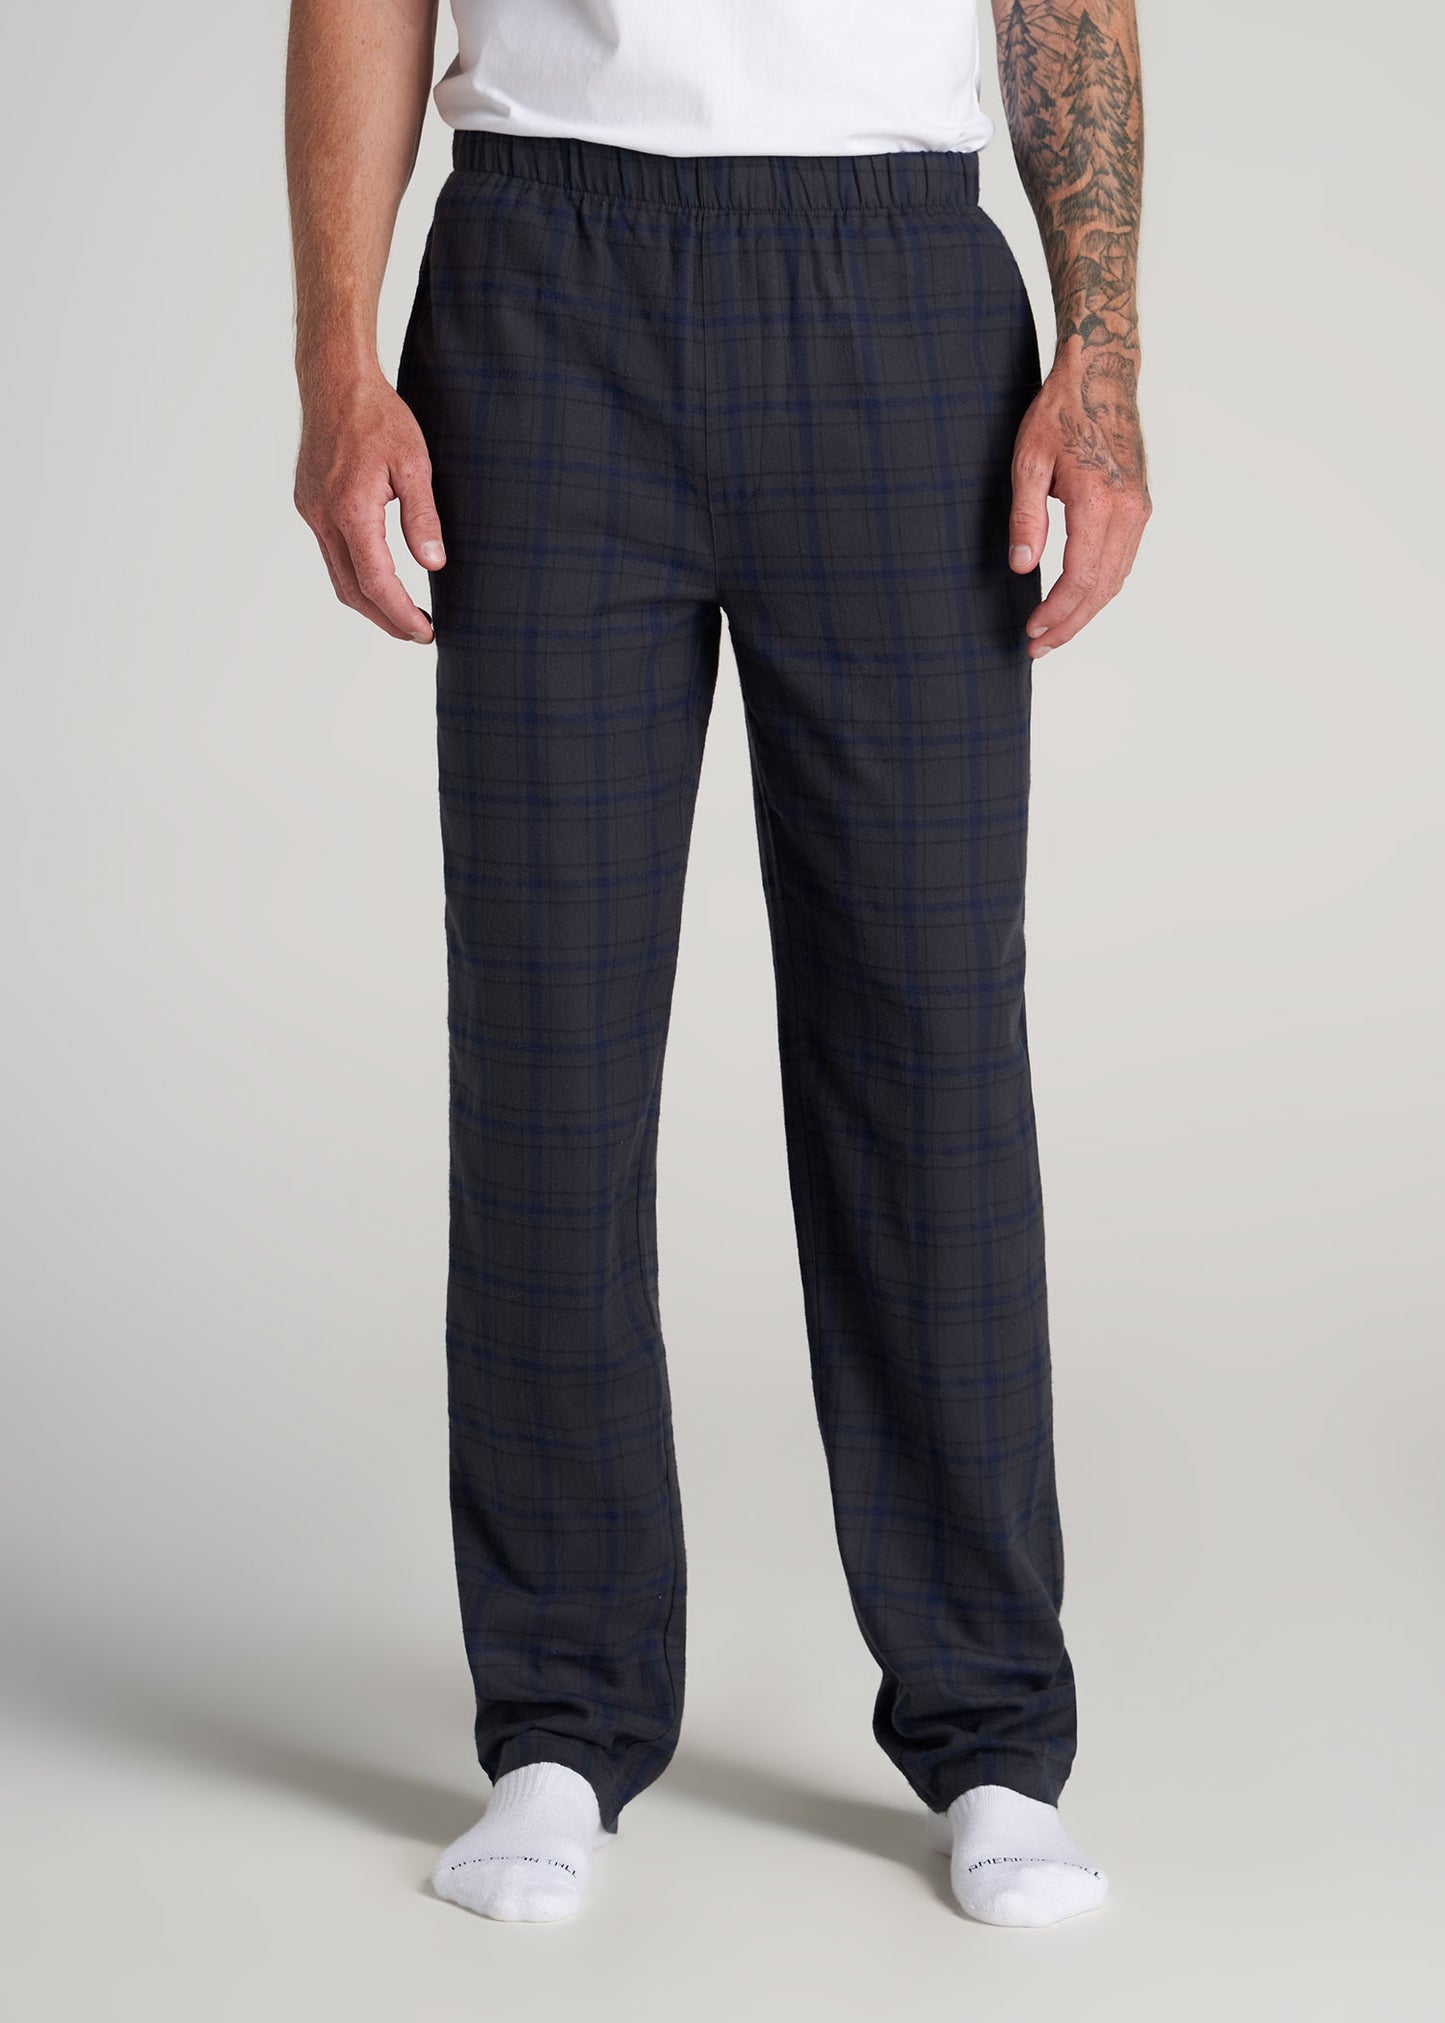       American-Tall-Men-Flannel-Pajamas-Charcoal-Navy-Plaid-front